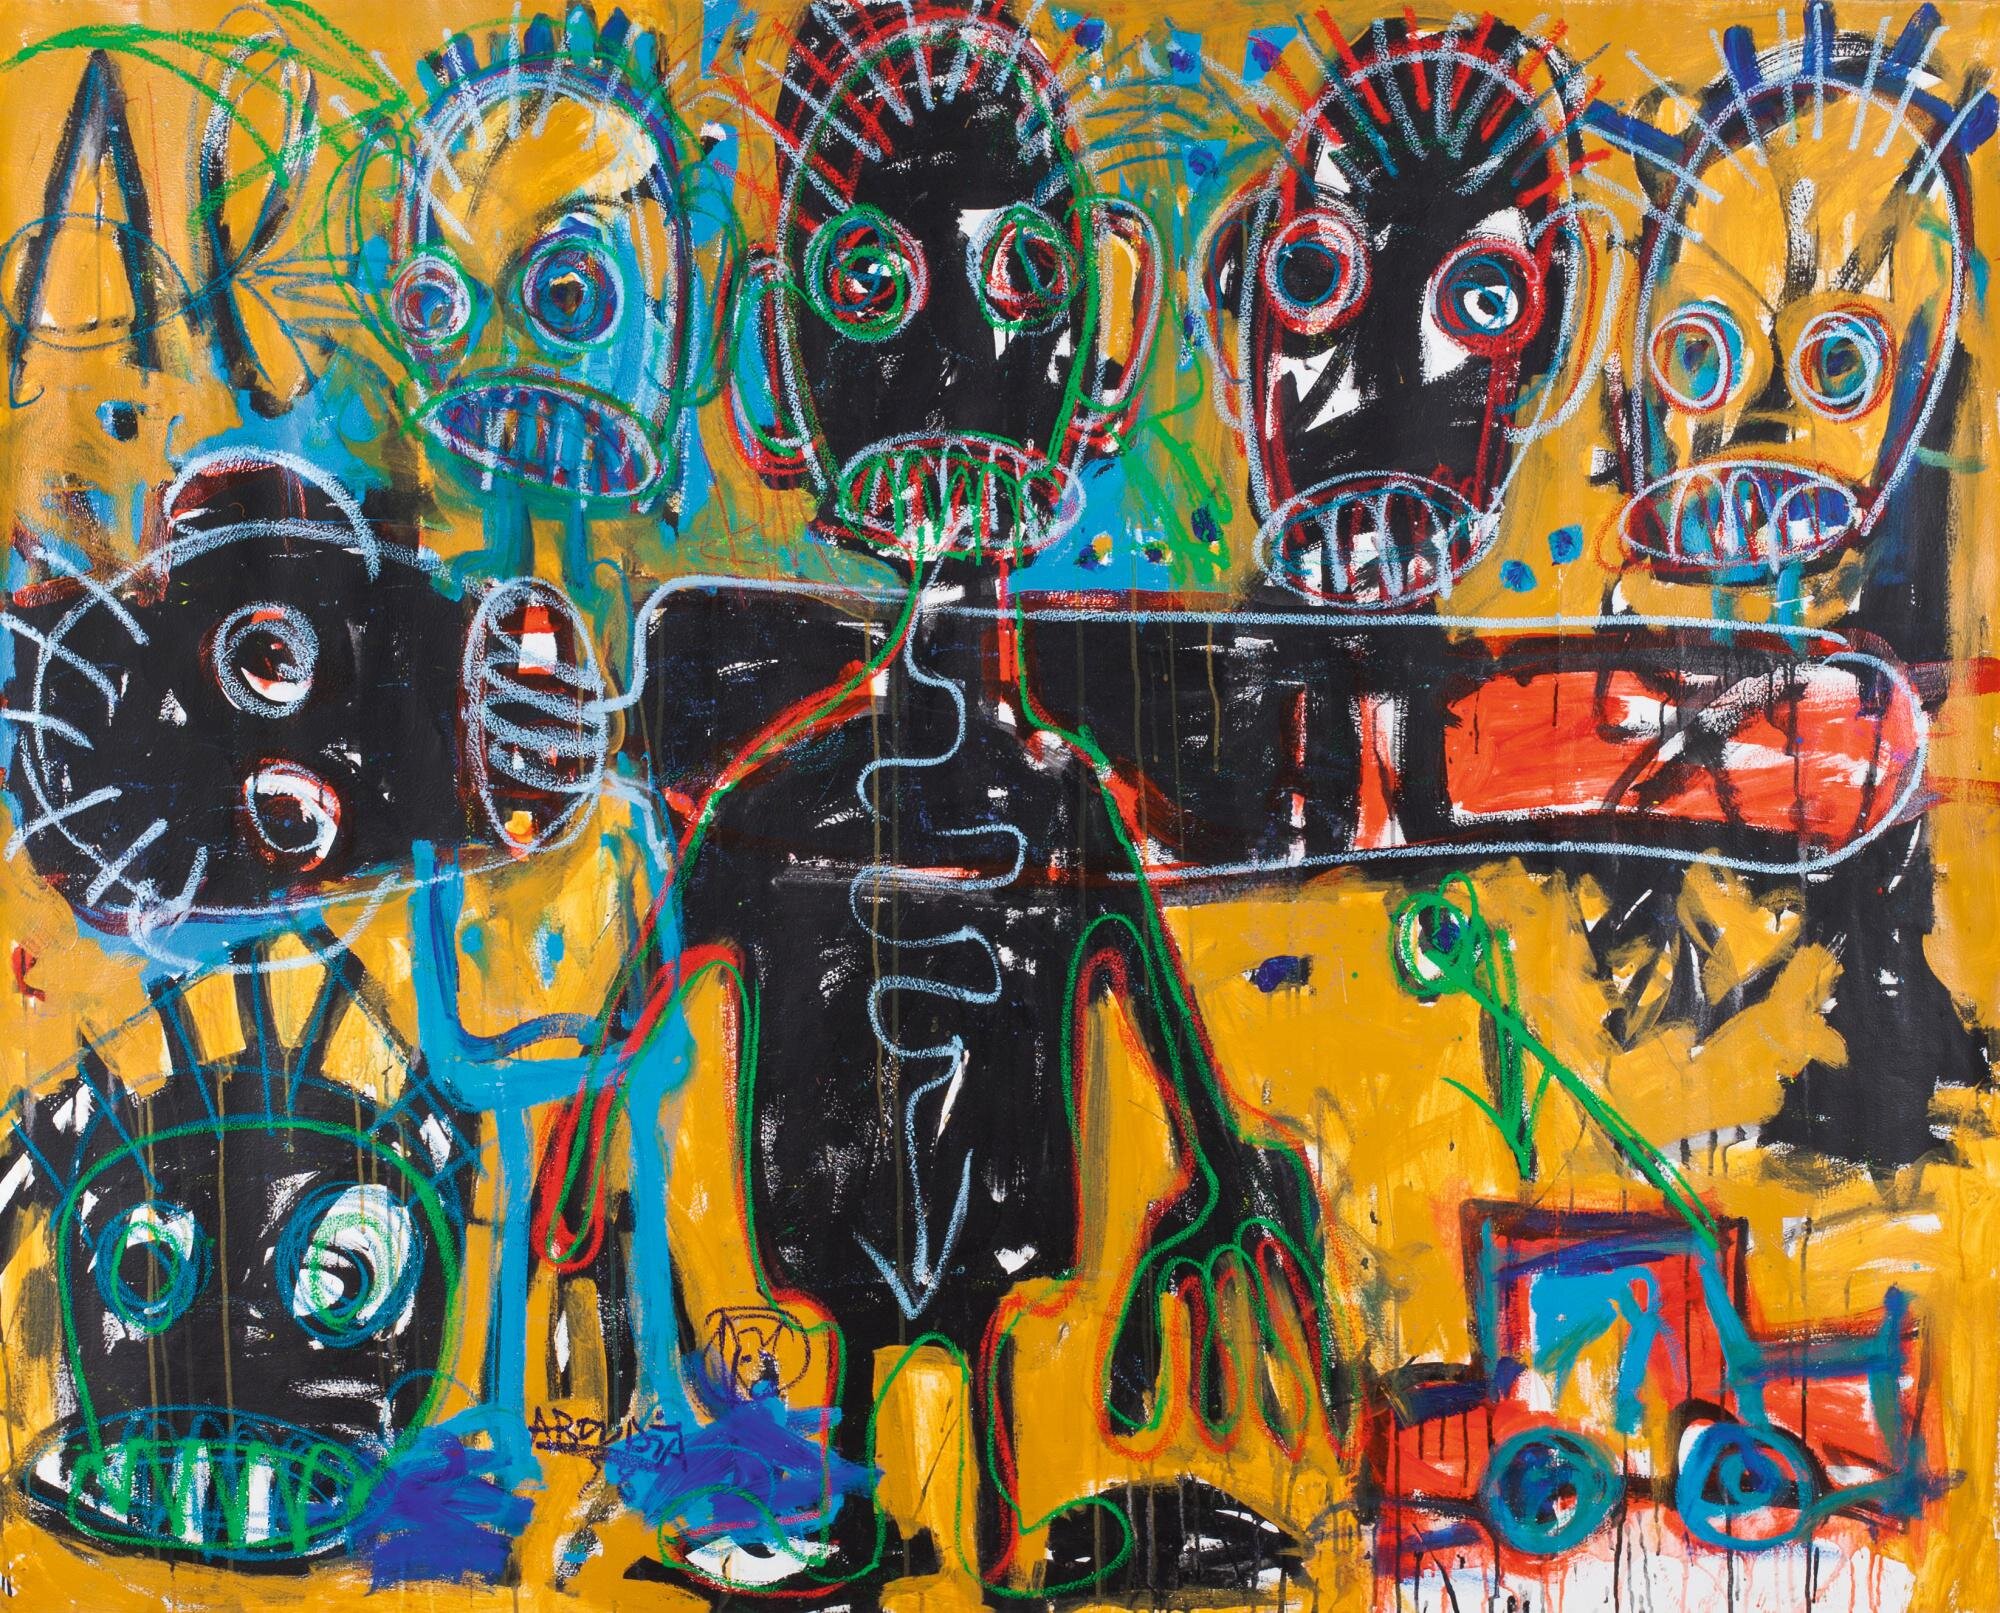 Aboudia Abdoulaye Diarrassouba

Hailing from C&ocirc;te d'Ivoire, Aboudia's art celebrates African culture, raw emotions, and urban realities. His bold strokes and graffiti-inspired style breathe life into the canvas, leaving us mesmerized by the dep